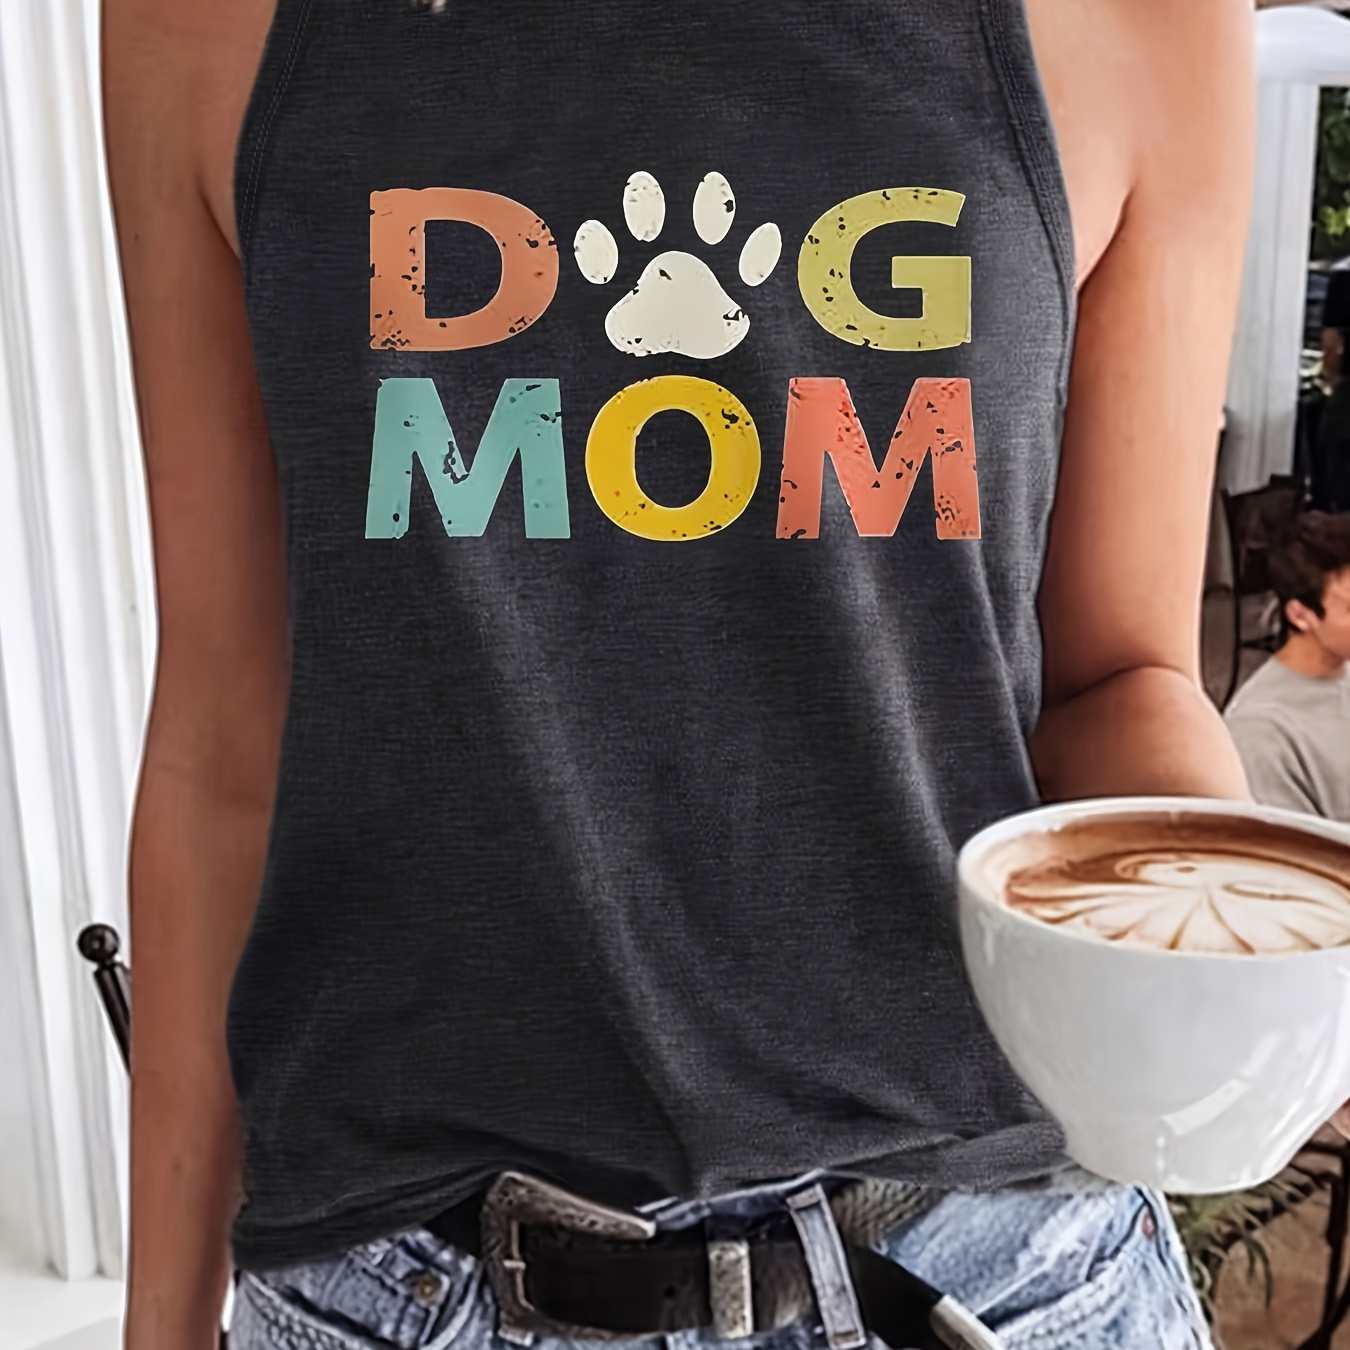 

Dog Mom & Paw Print Tank Top, Casual Sleeveless Crew Neck Top For Summer & Spring, Women's Clothing